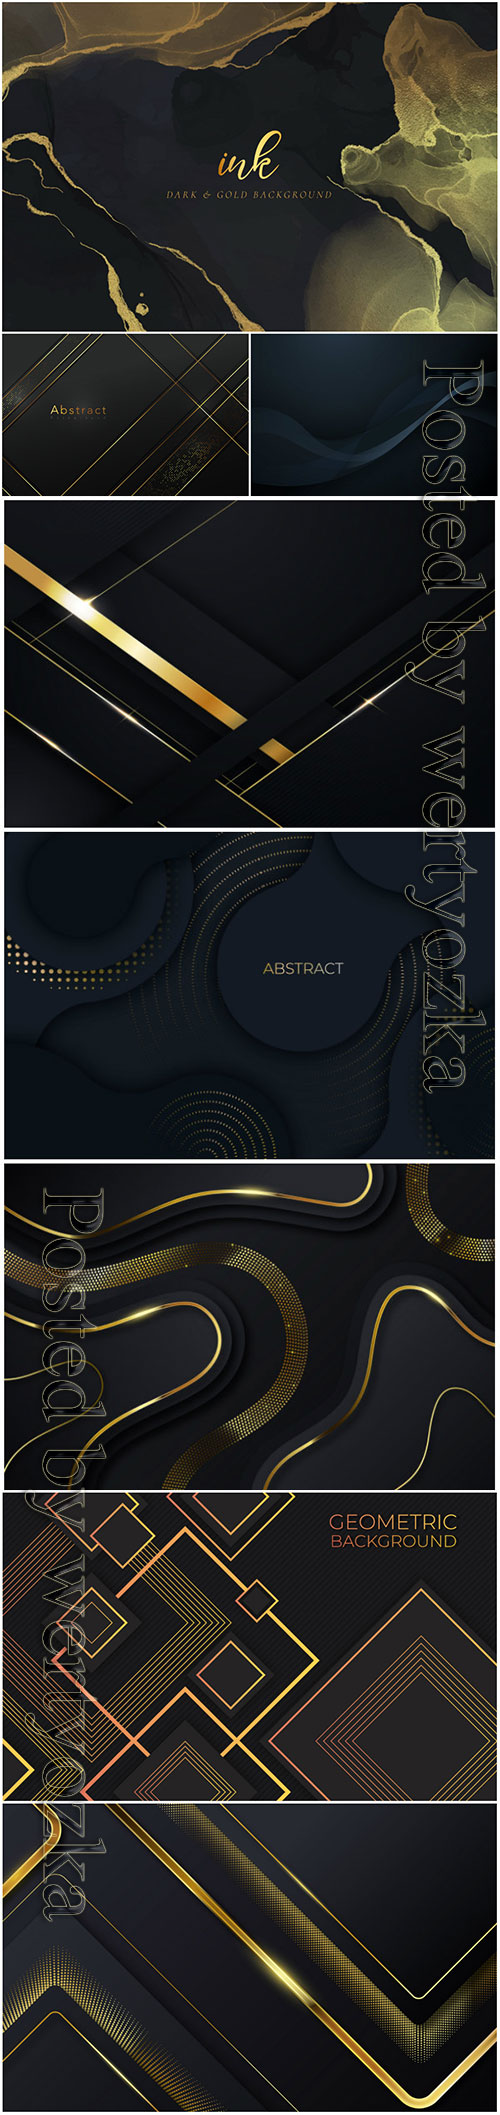 Luxury abstract backgrounds in vector # 5